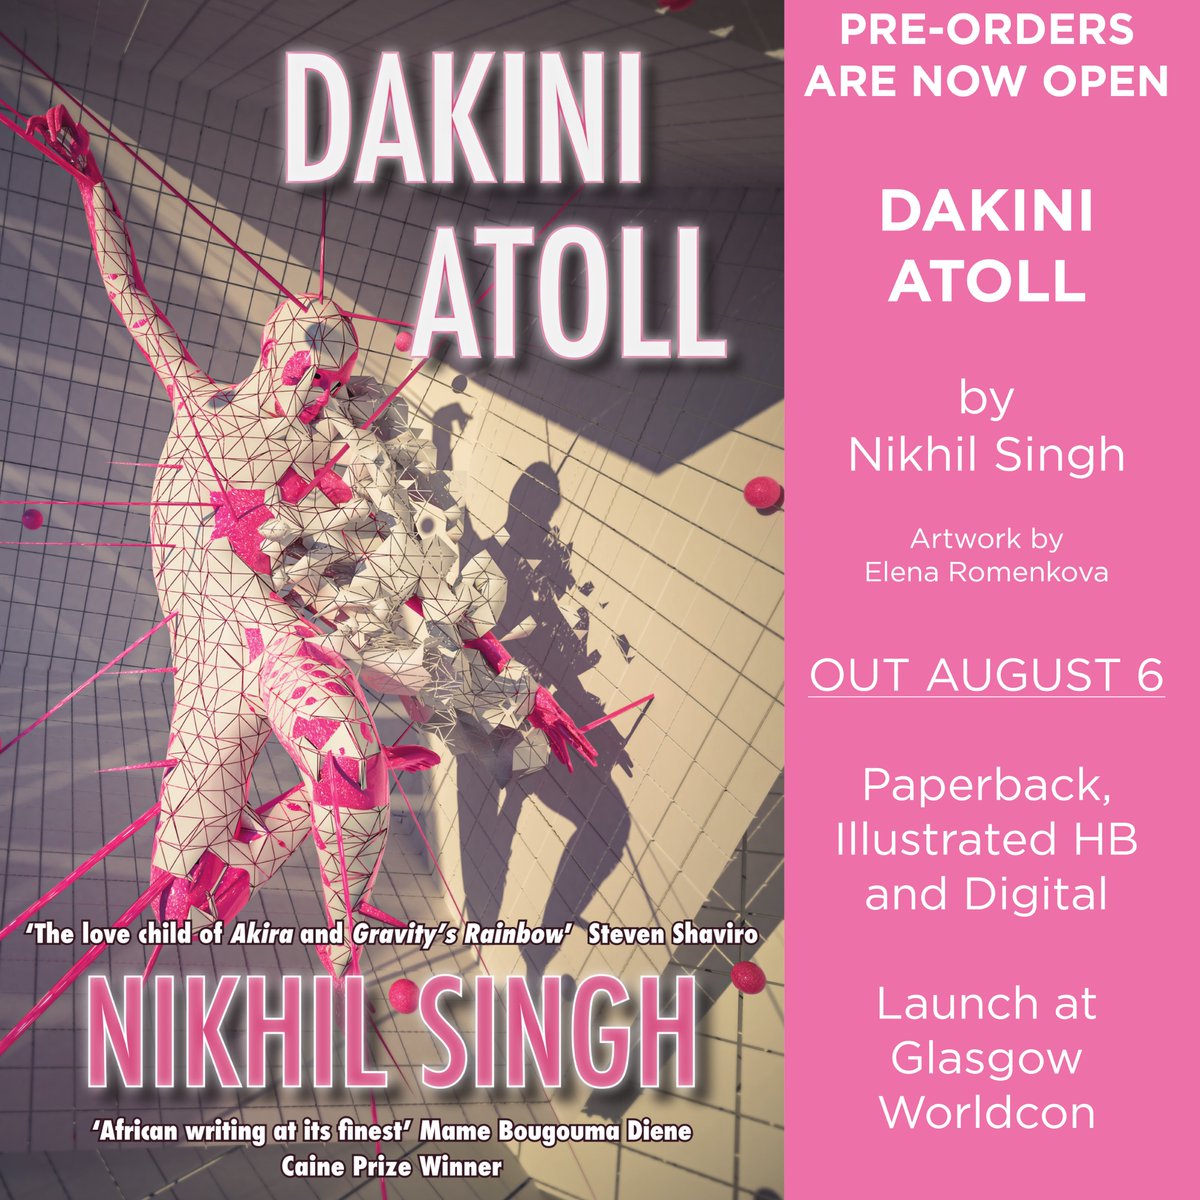 Pre-orders are now open for Dakini Atoll, by Nikhil Singh! Join us for this fast-paced, tech-driven, metaphysical #Cyberpunk novel. Set in the near future, in Johannesburg, New York, London, Saudi Arabia and Holographic Reality! lunapresspublishing.com/novels